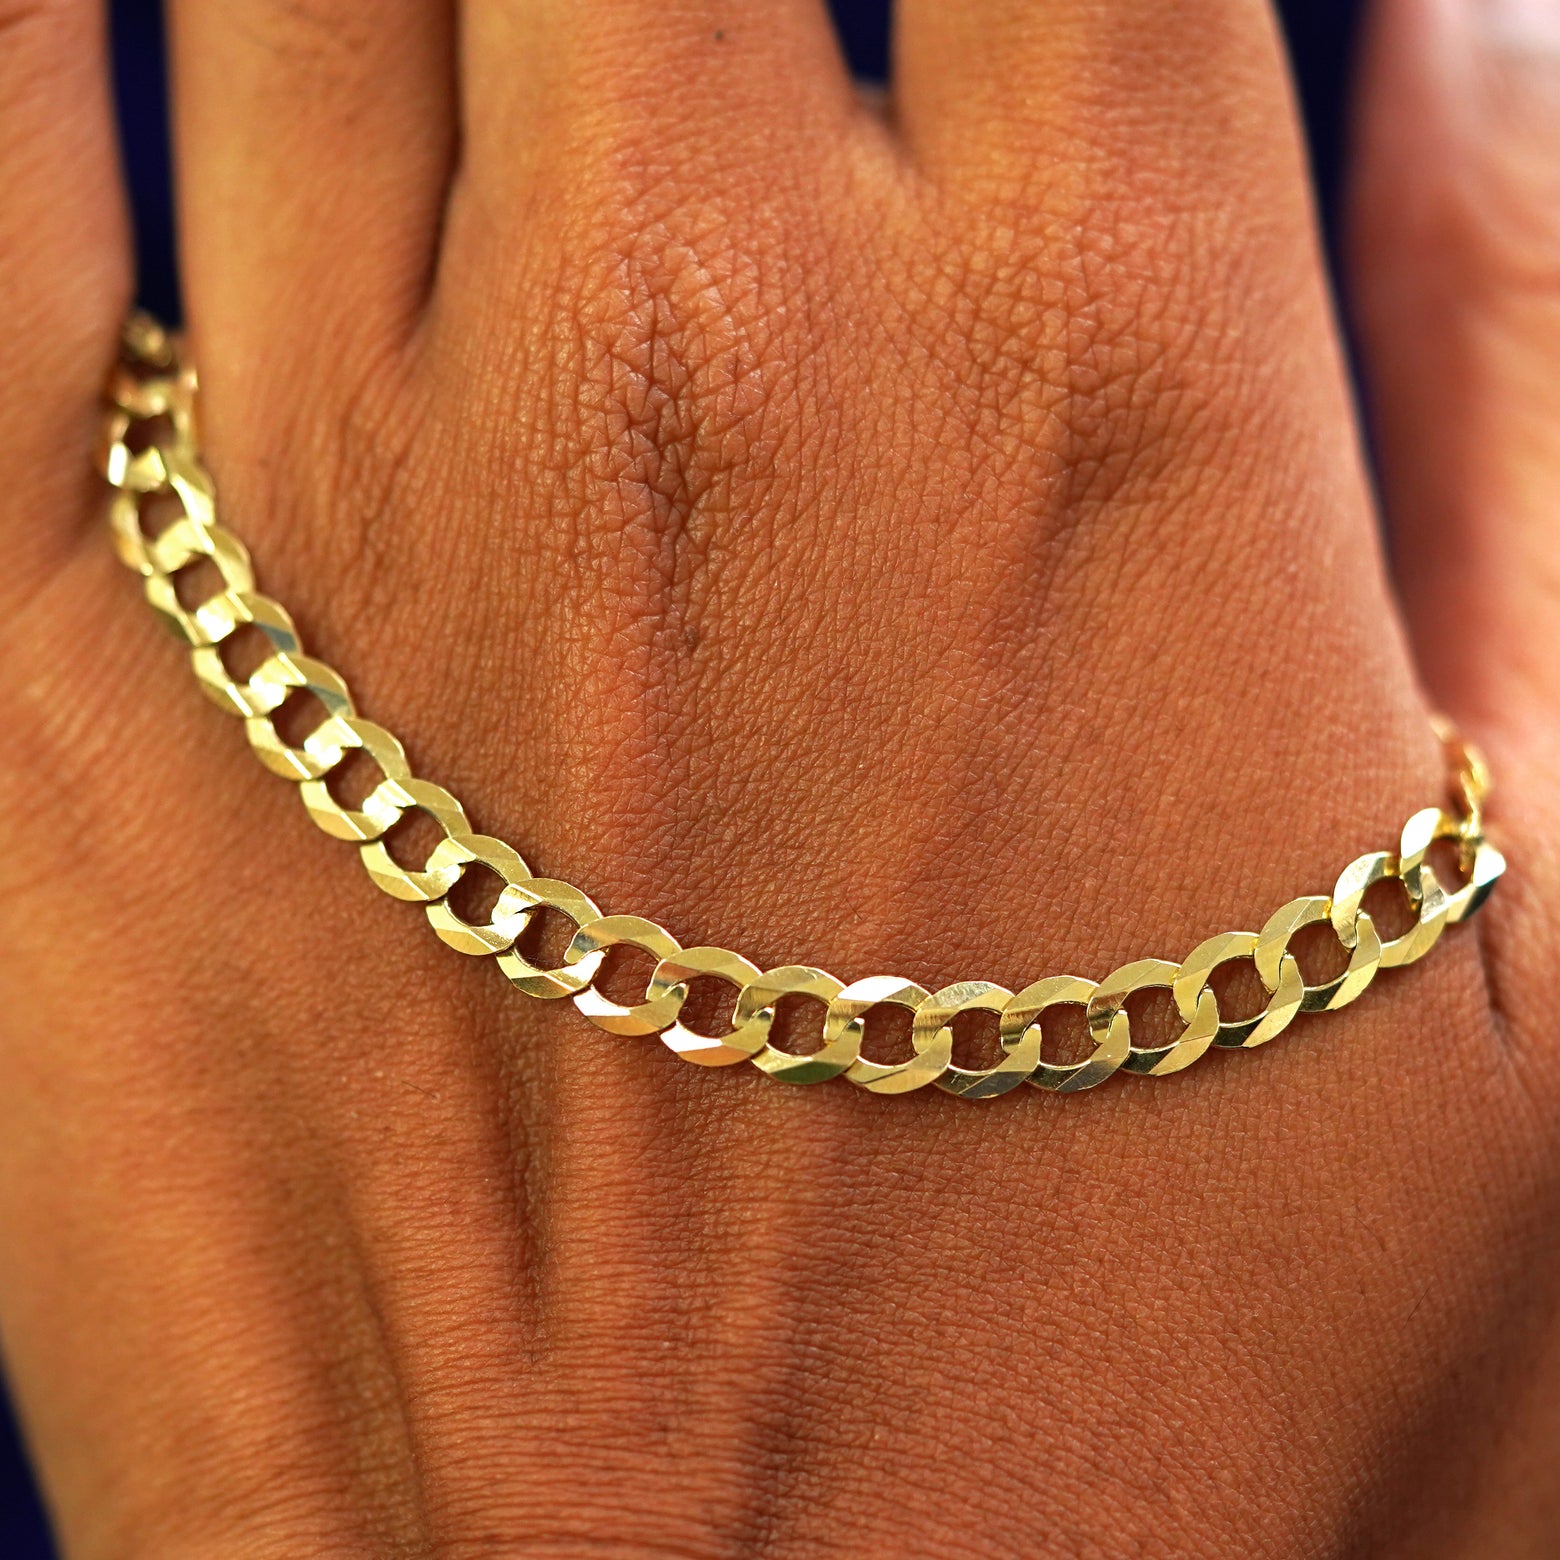 A solid gold Curb Chain resting on the back of a model's hand